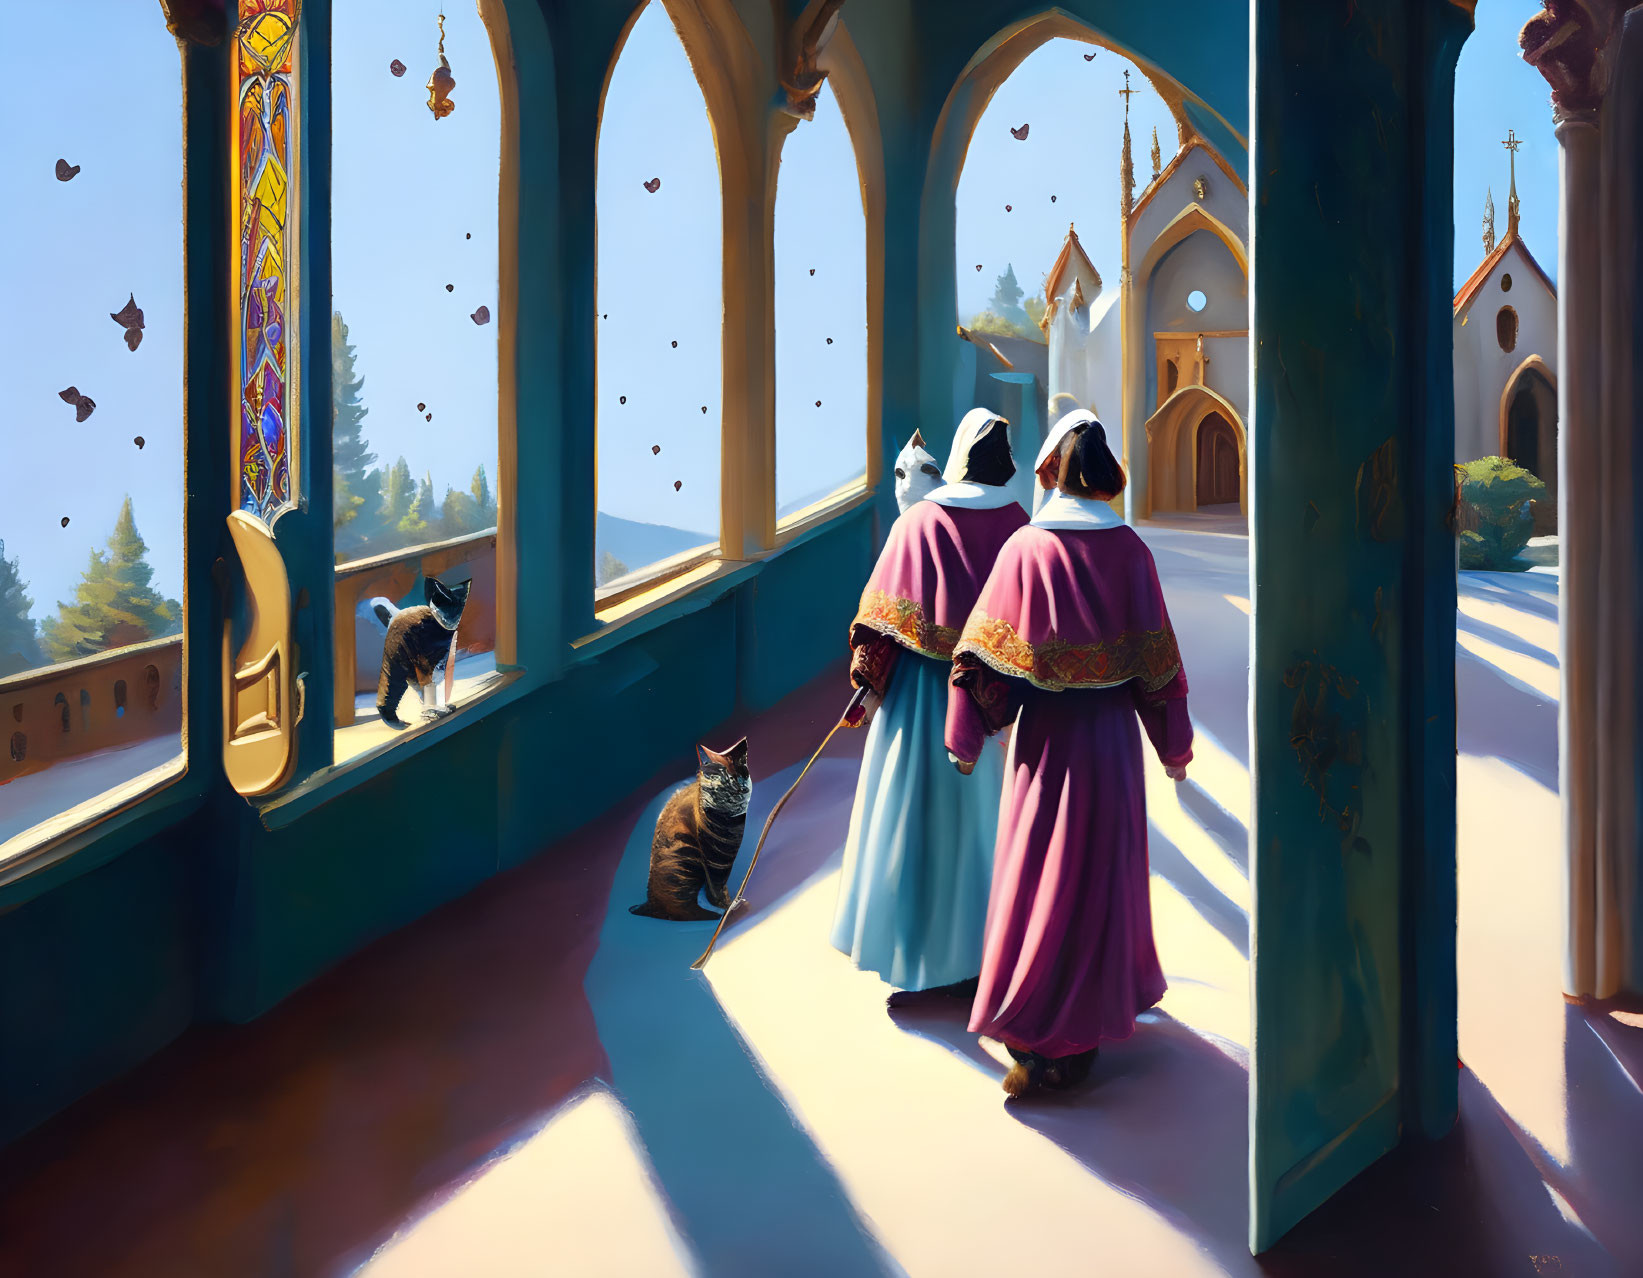 Three robed figures, two cats in sunlit arched corridor overlooking distant church.